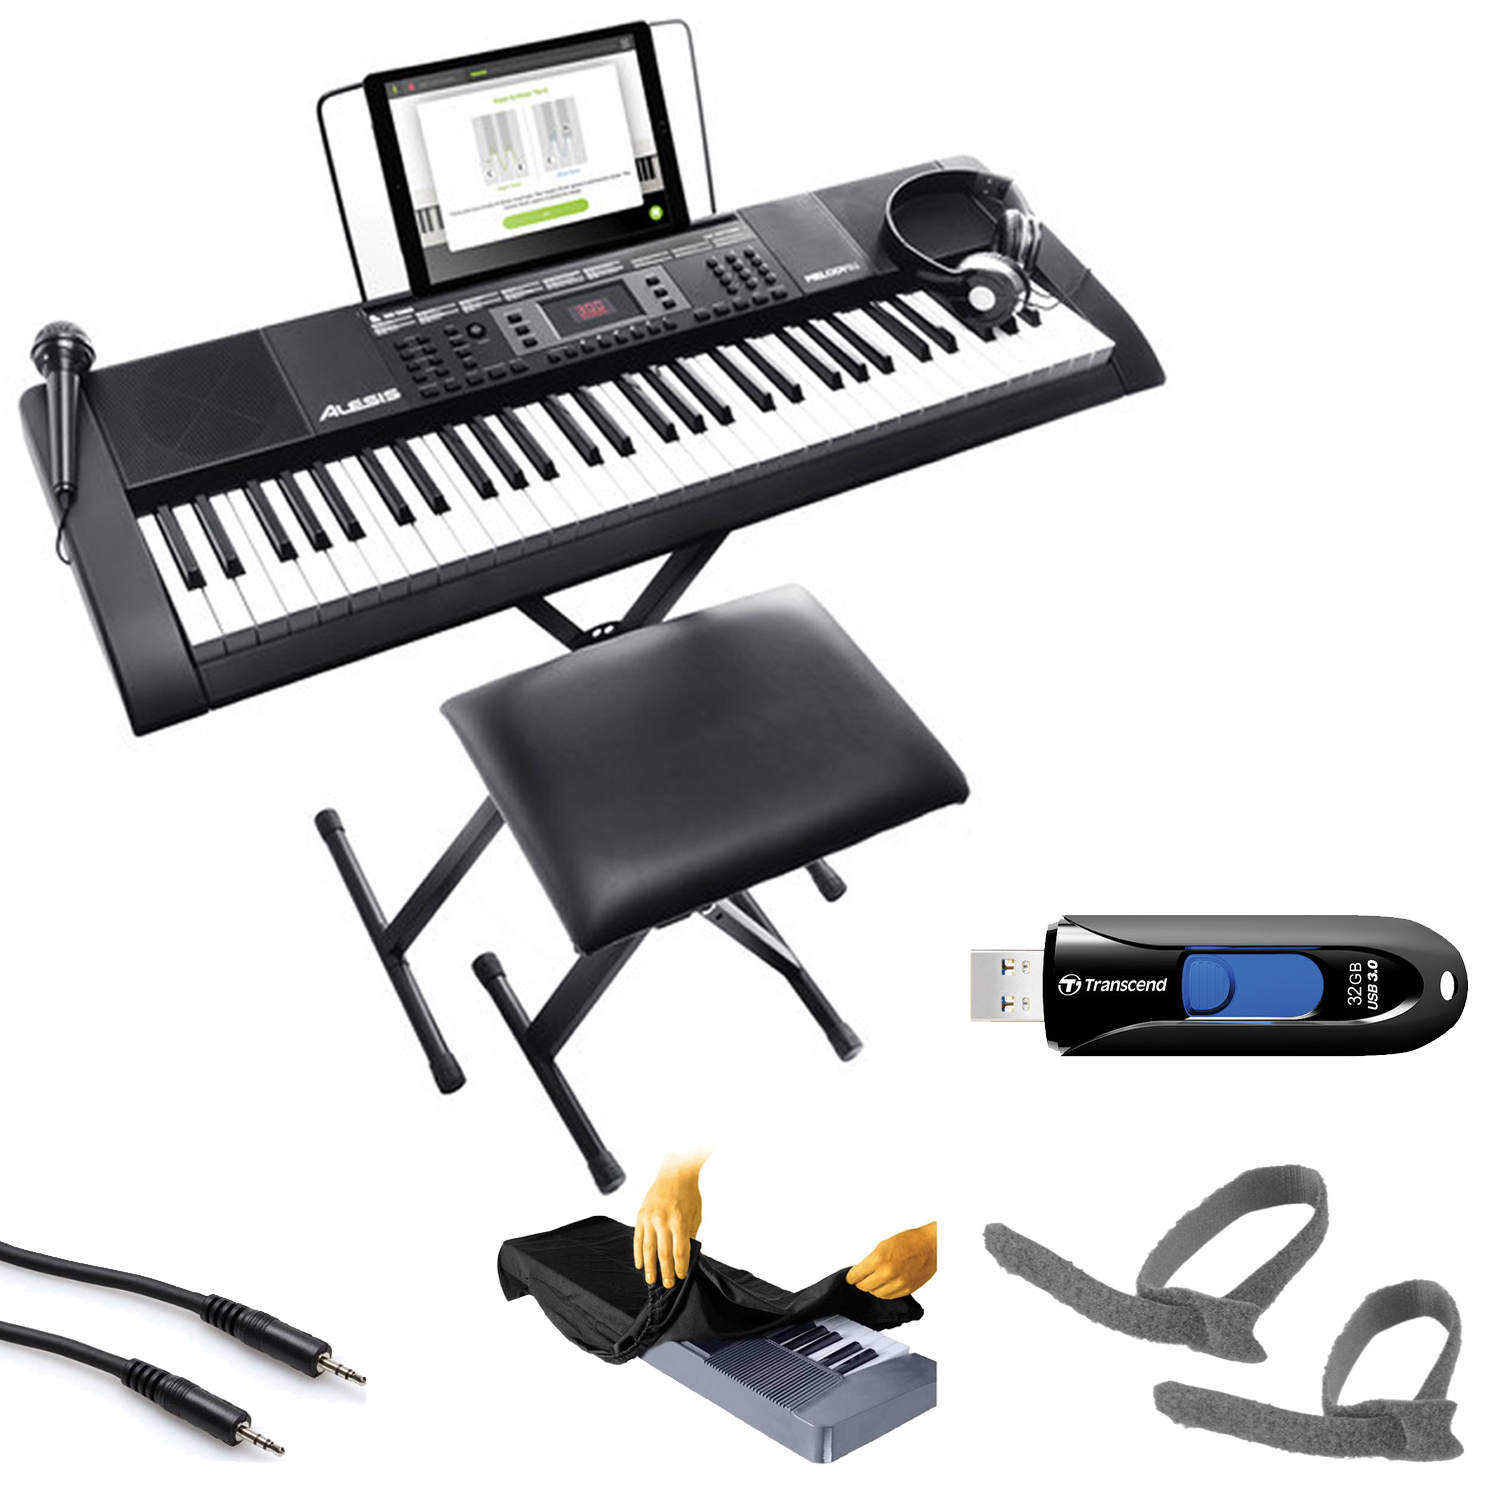 Photo4Less  Alesis Melody 61 MKII - 61-Key Portable Keyboard with Built-In  Speakers + Cable + Cable Ties + Keyboard Cover + Flash Drive